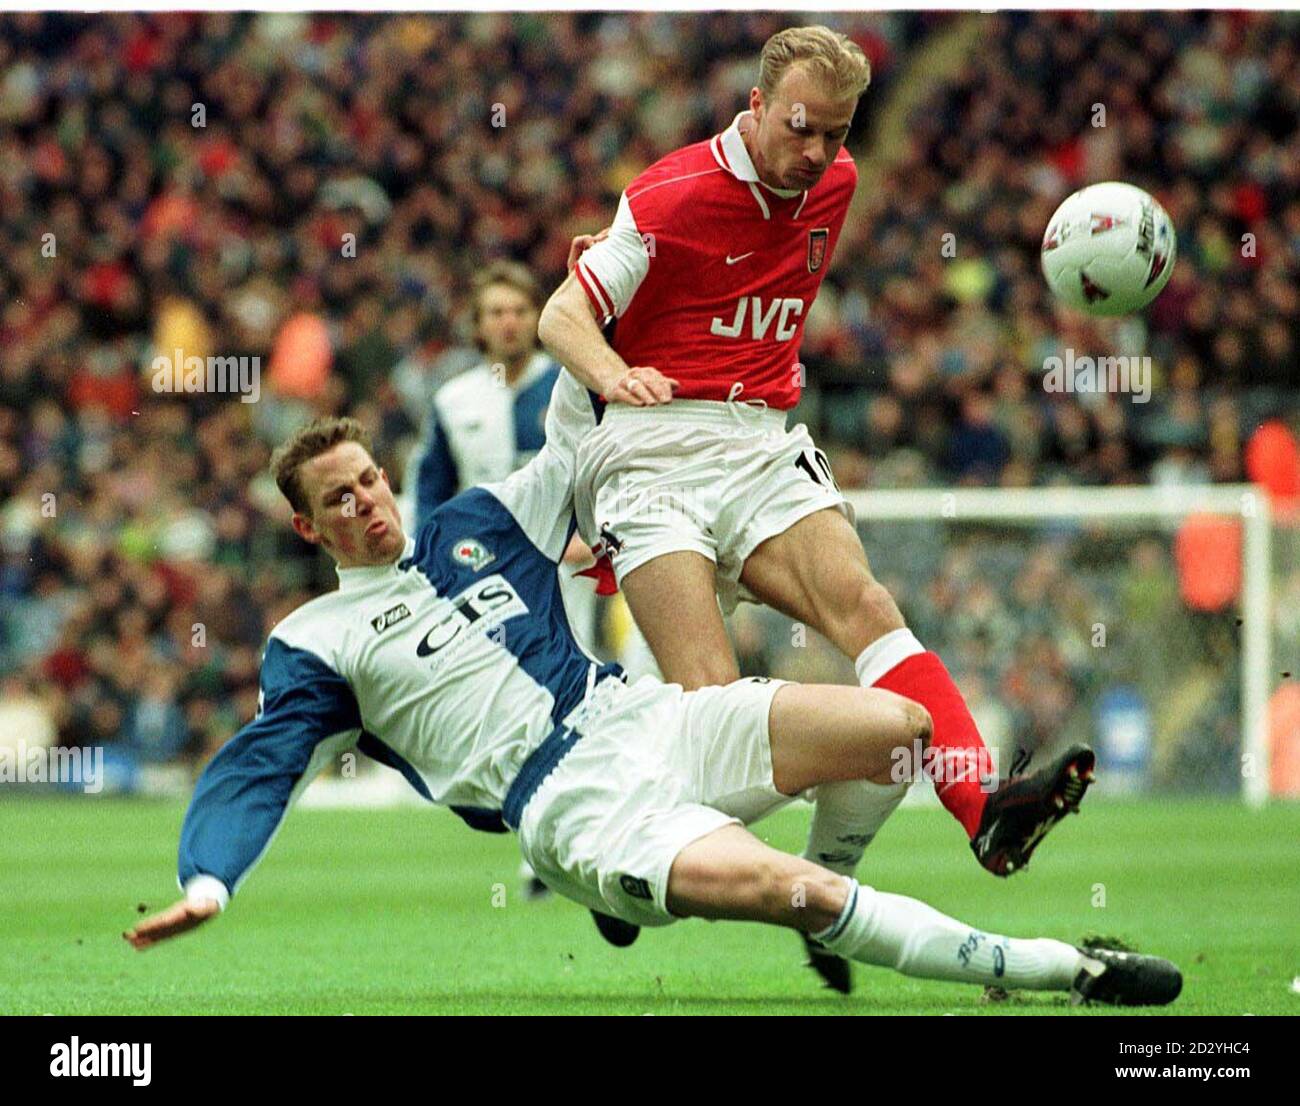 Arsenal's Dennis Bergkamp (right) rides a tackle from Blackburn Rovers Stephane Henchoz during today's FA Carling Premiership match at Ewood Park. Photo by Brian Williamson/PA. Stock Photo